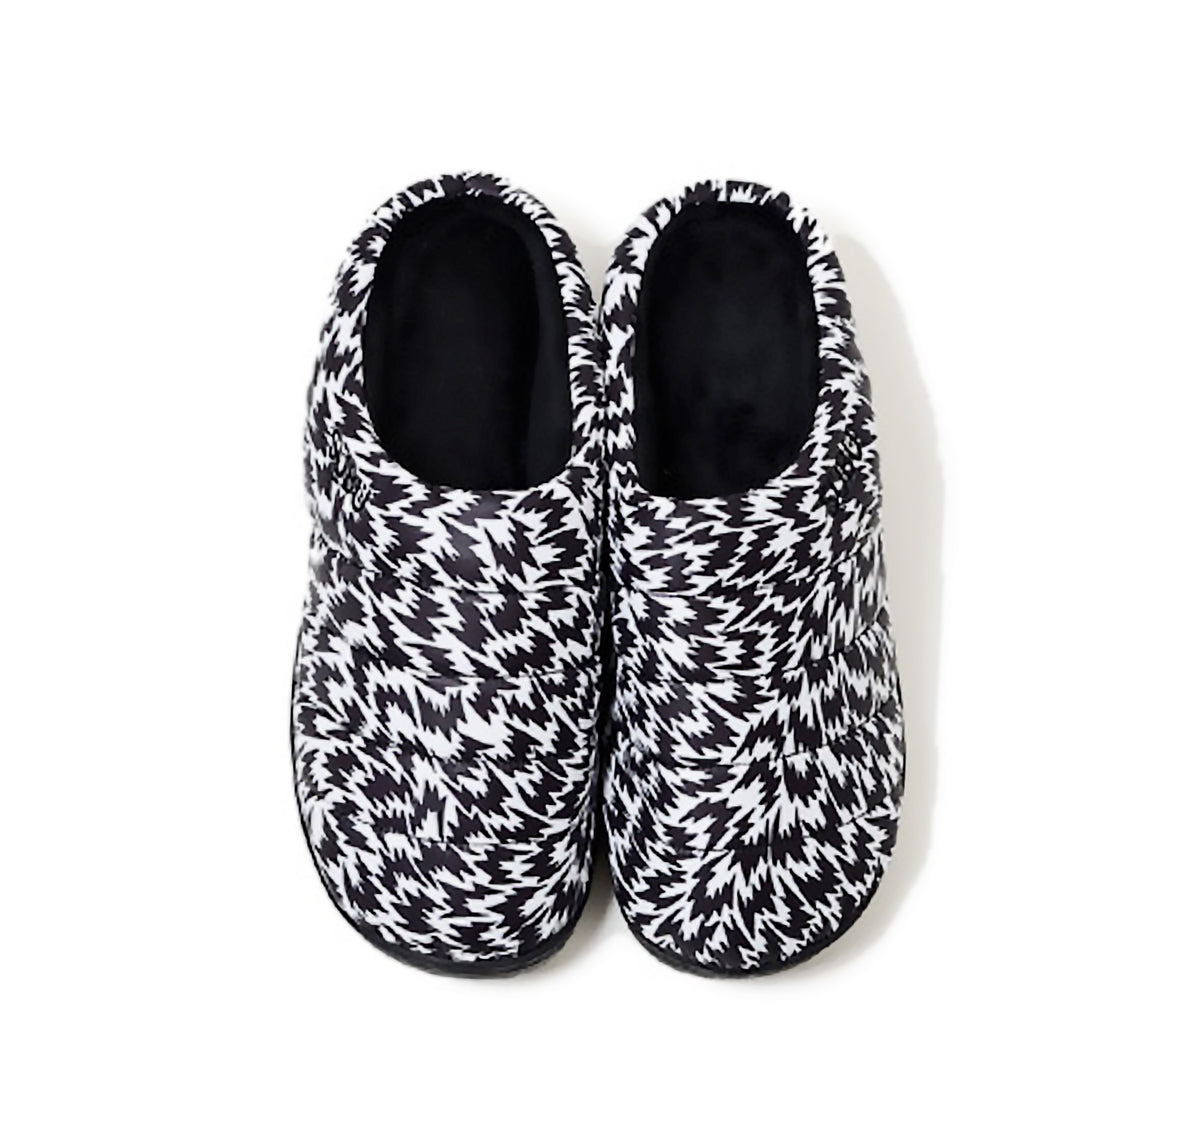 SUBU, Fall & Winter Concept Slippers Flash, Size, 0, Slippers,